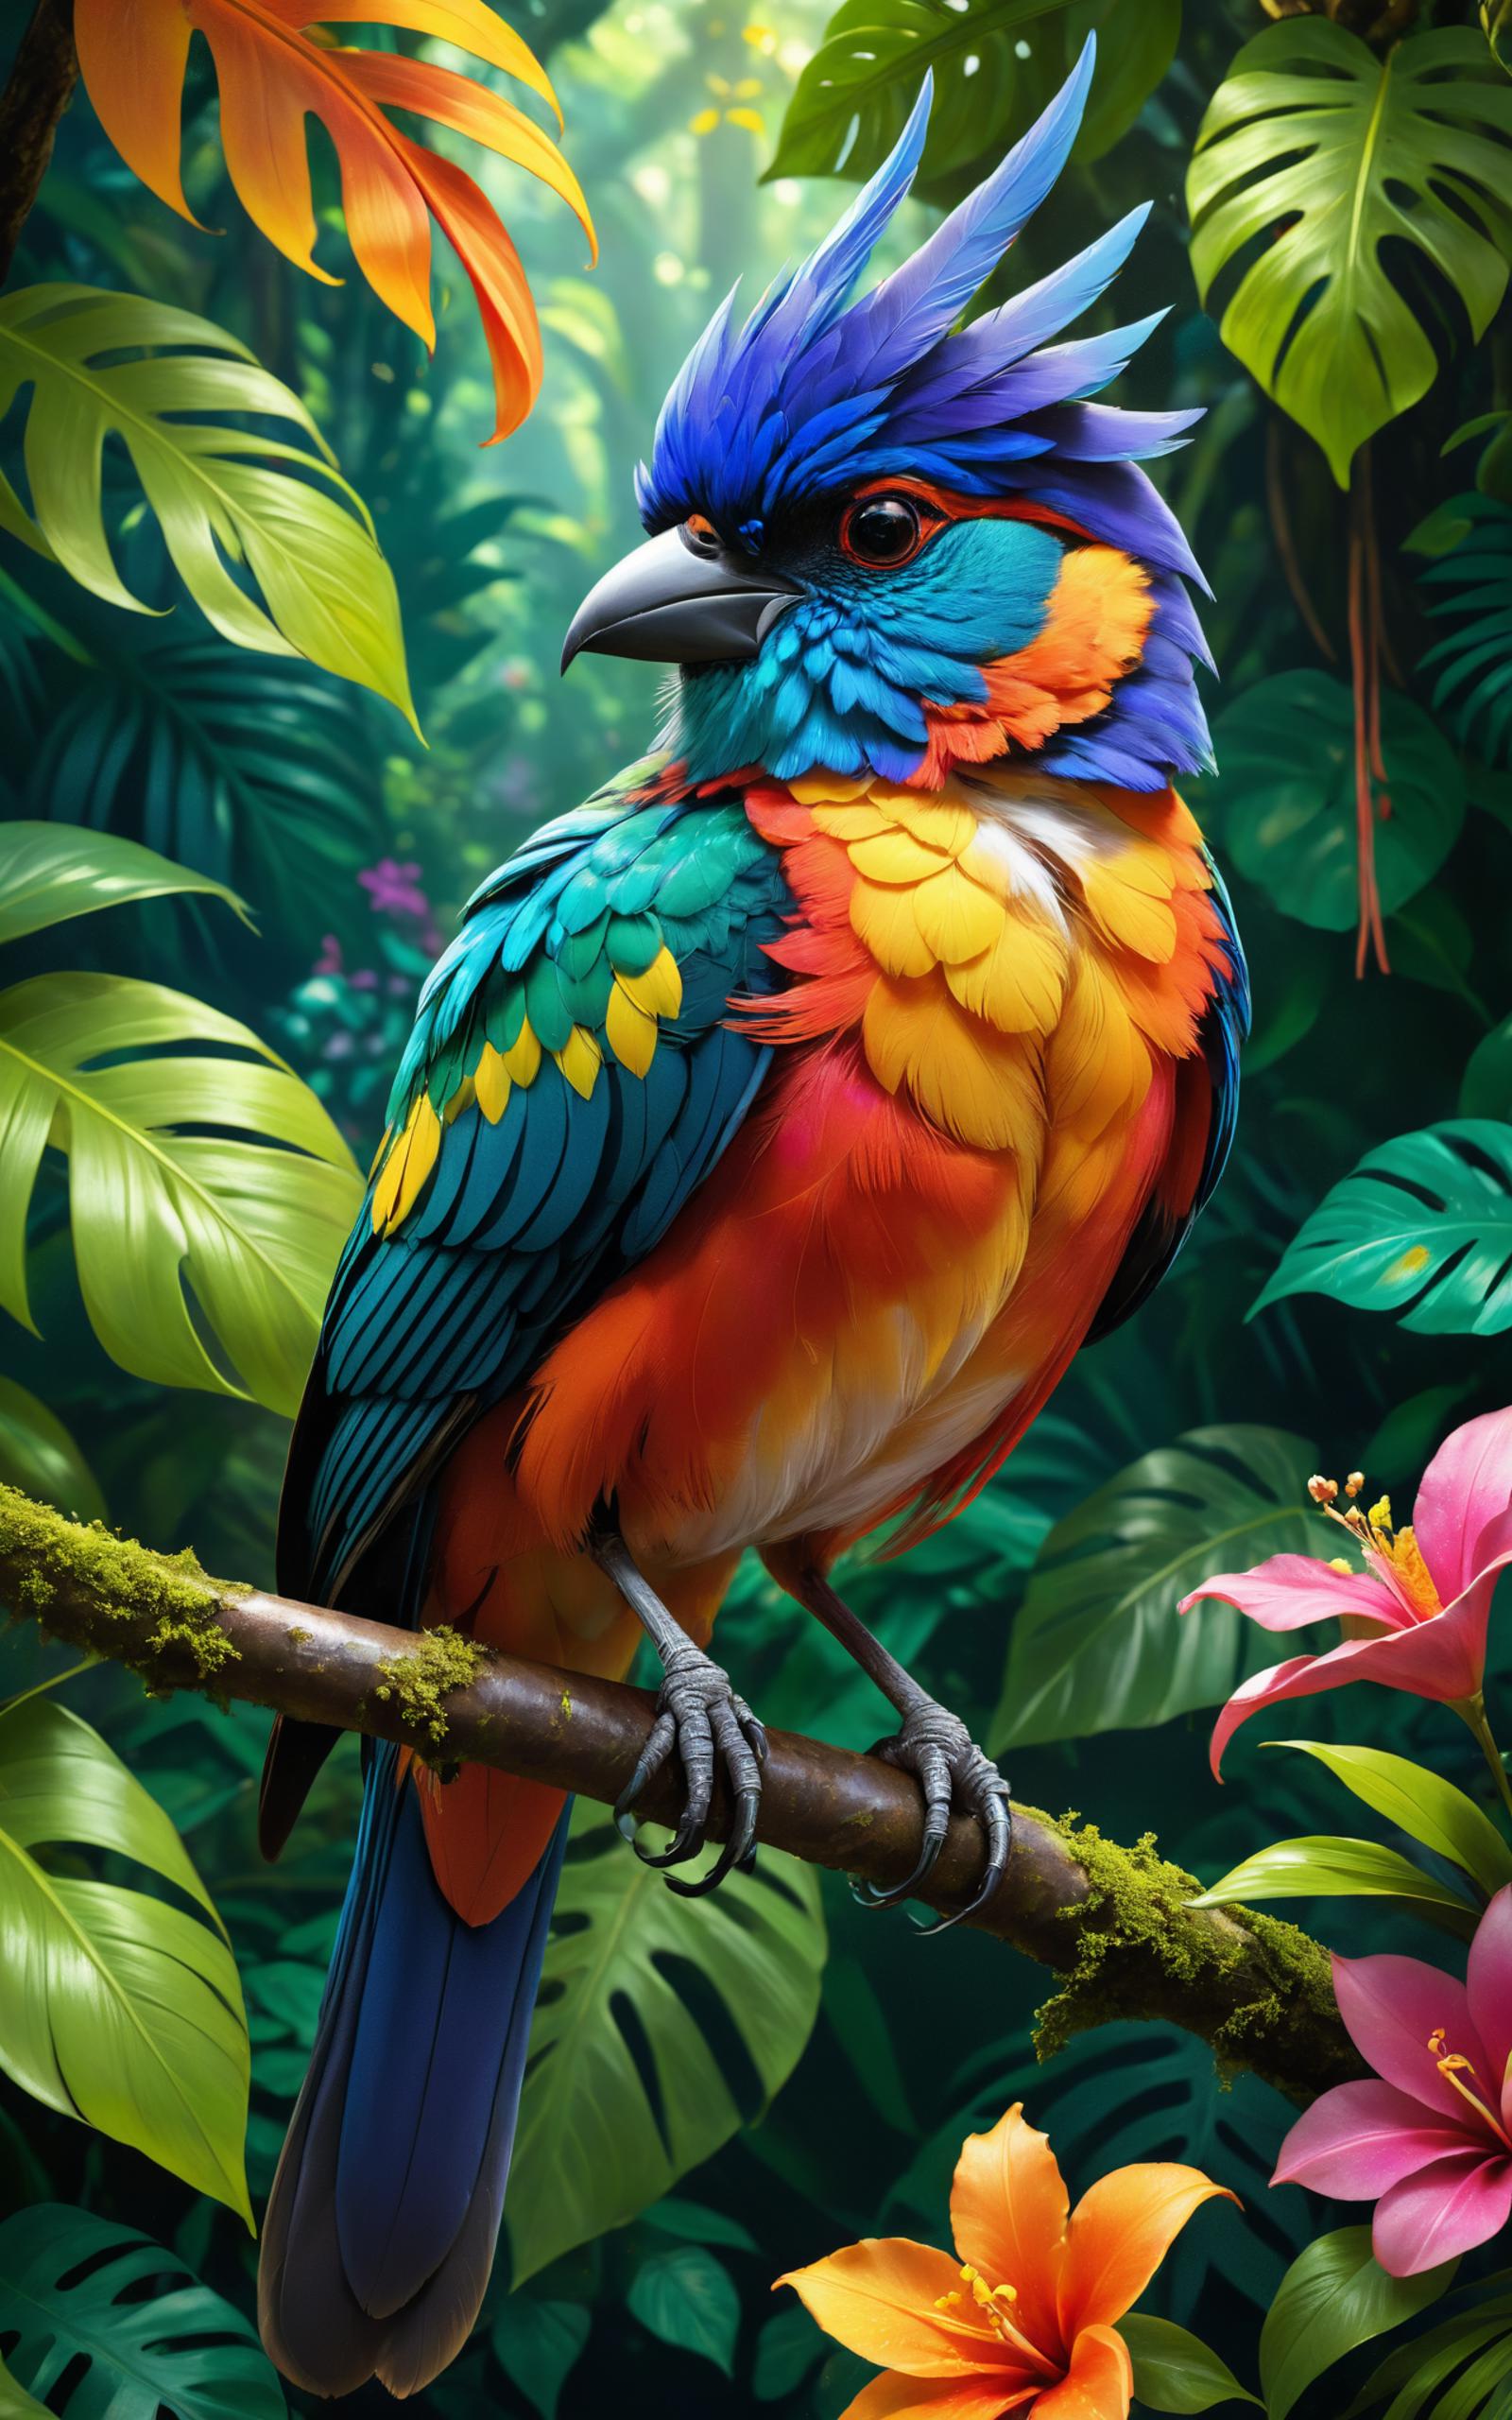 A colorful bird perched on a branch in a lush green forest.